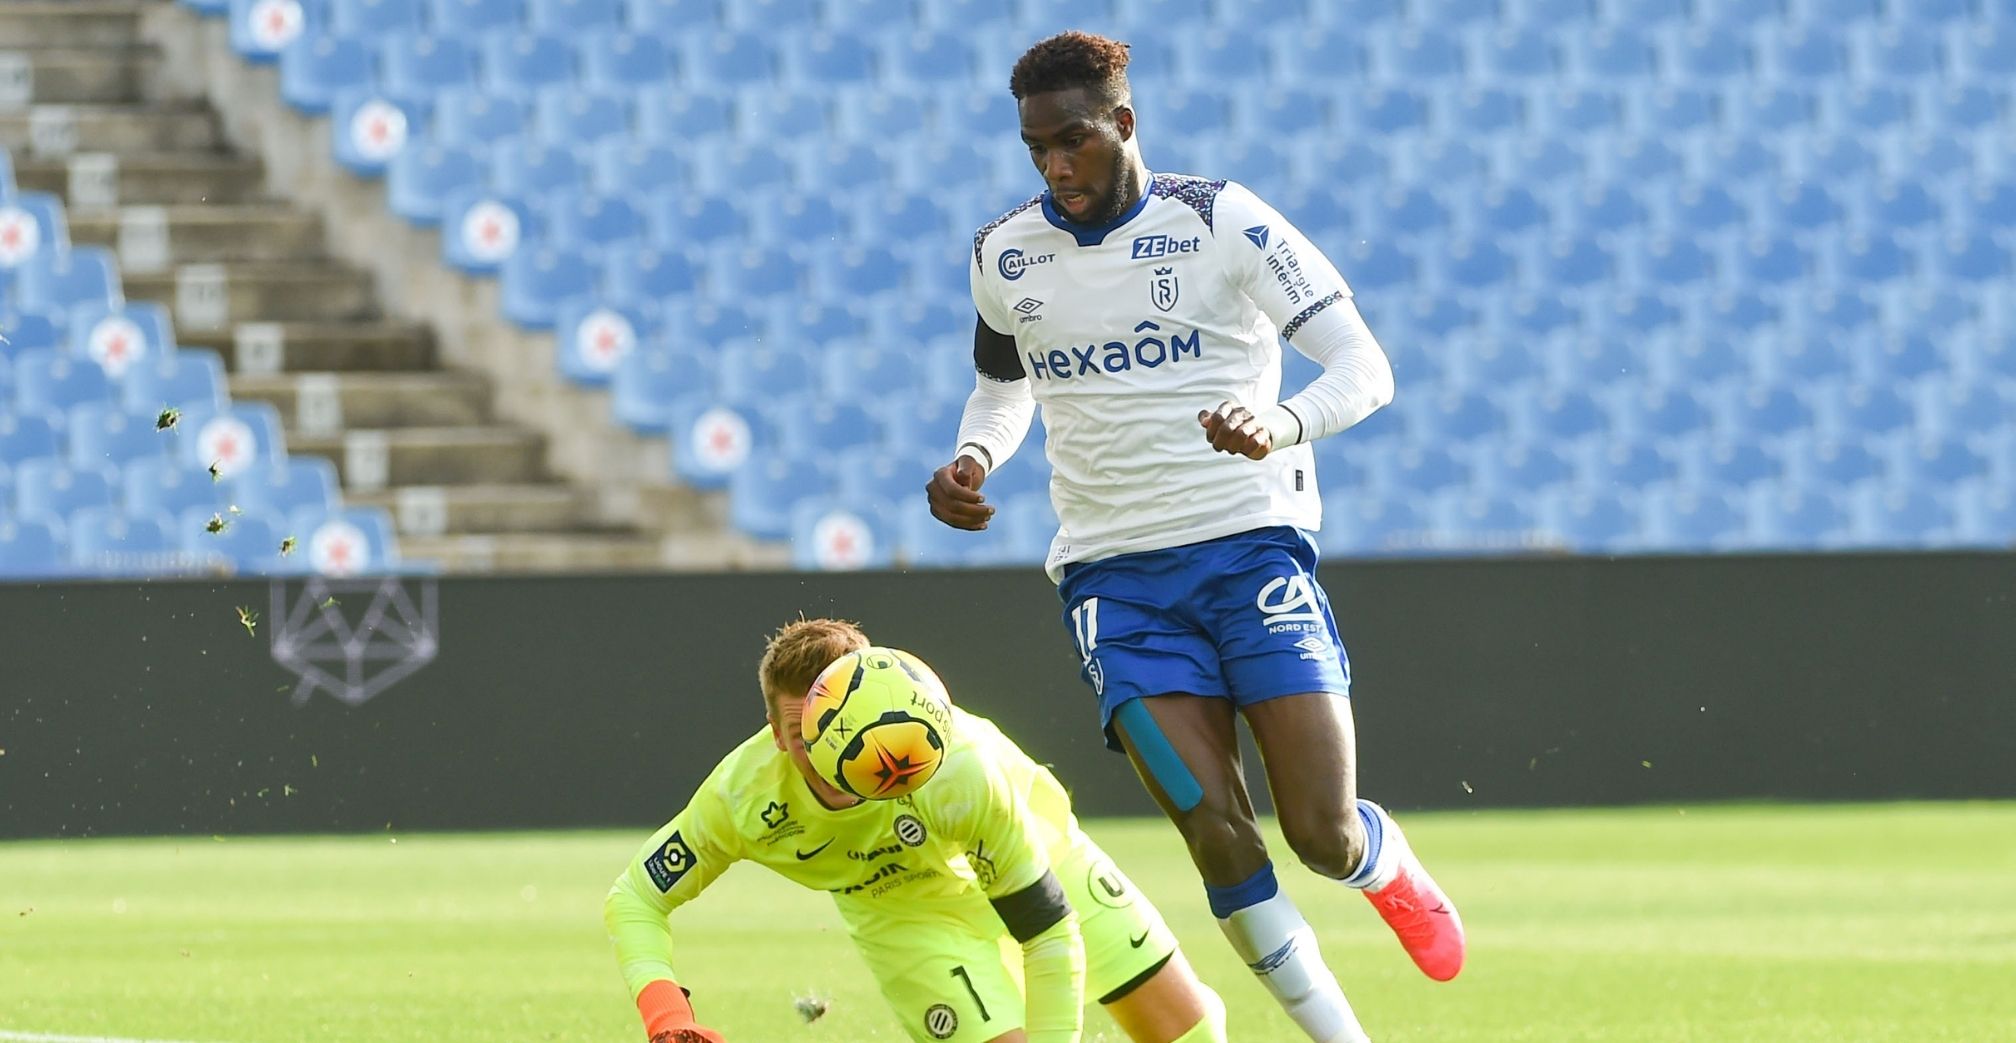 Reims striker Boulaye Dia is linked with a move to Steve Bruce's Newcastle United. (Photo: Ligue 1 Official website)